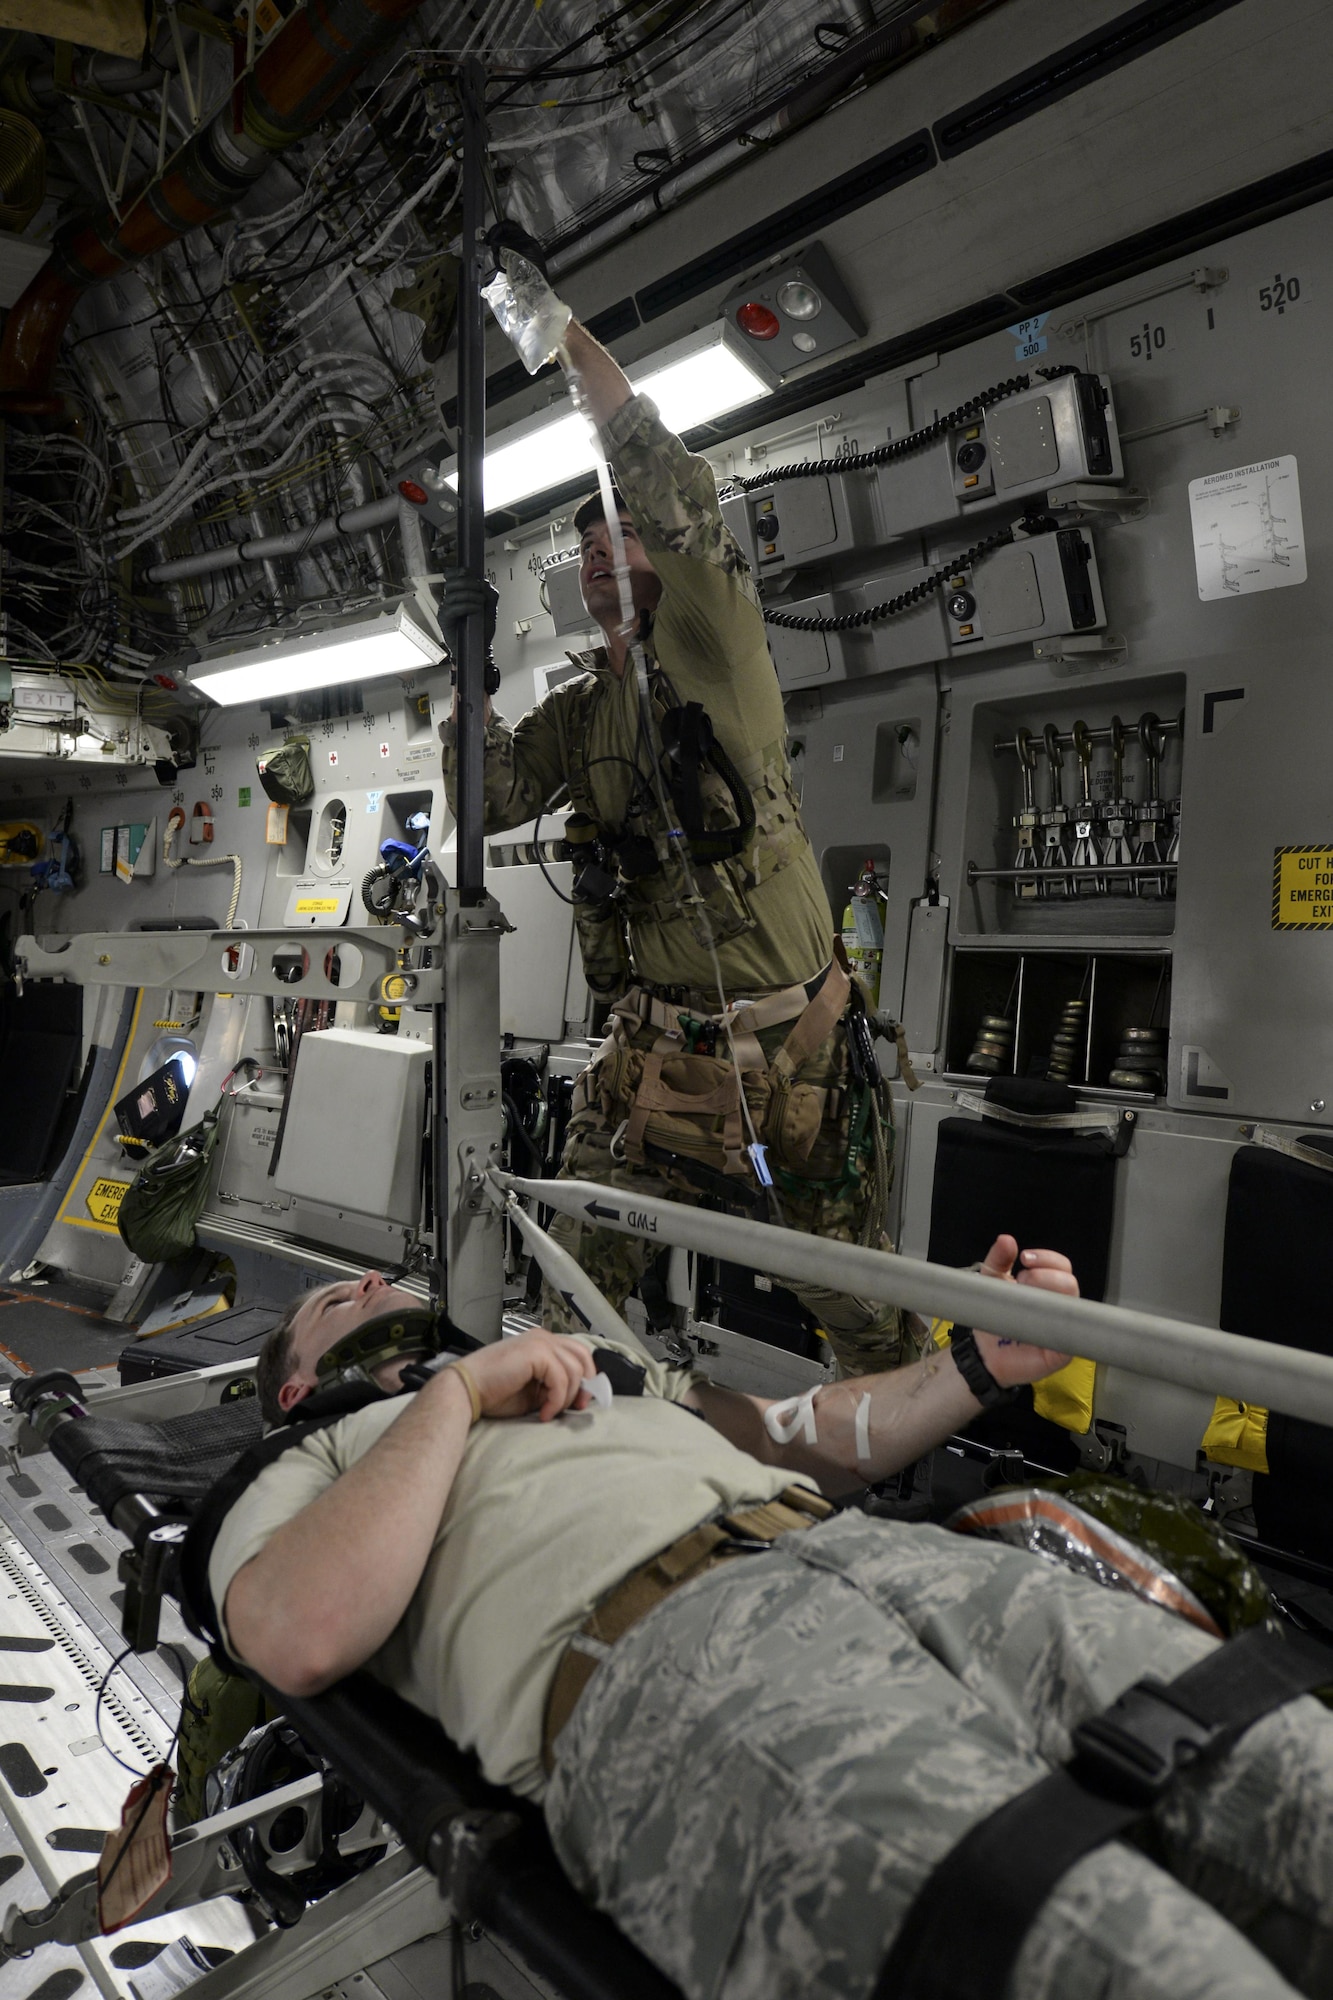 Senior Airman Jay Vinehout, 38th Rescue Squadron pararescueman assigned to Moody Air Force Base, Ga., hangs an IV bag for a simulated patient May 17, 2017, during Exercise RAPID RESCUE aboard a 3d Airlift Squadron C-17 Globemaster III. The plane flew around the coast of Va. for an hour while the 38th RS members practiced advanced medical techniques intended to stabilize patients with severe injuries. (U.S. Air Force photo by Senior Airman Aaron J. Jenne)